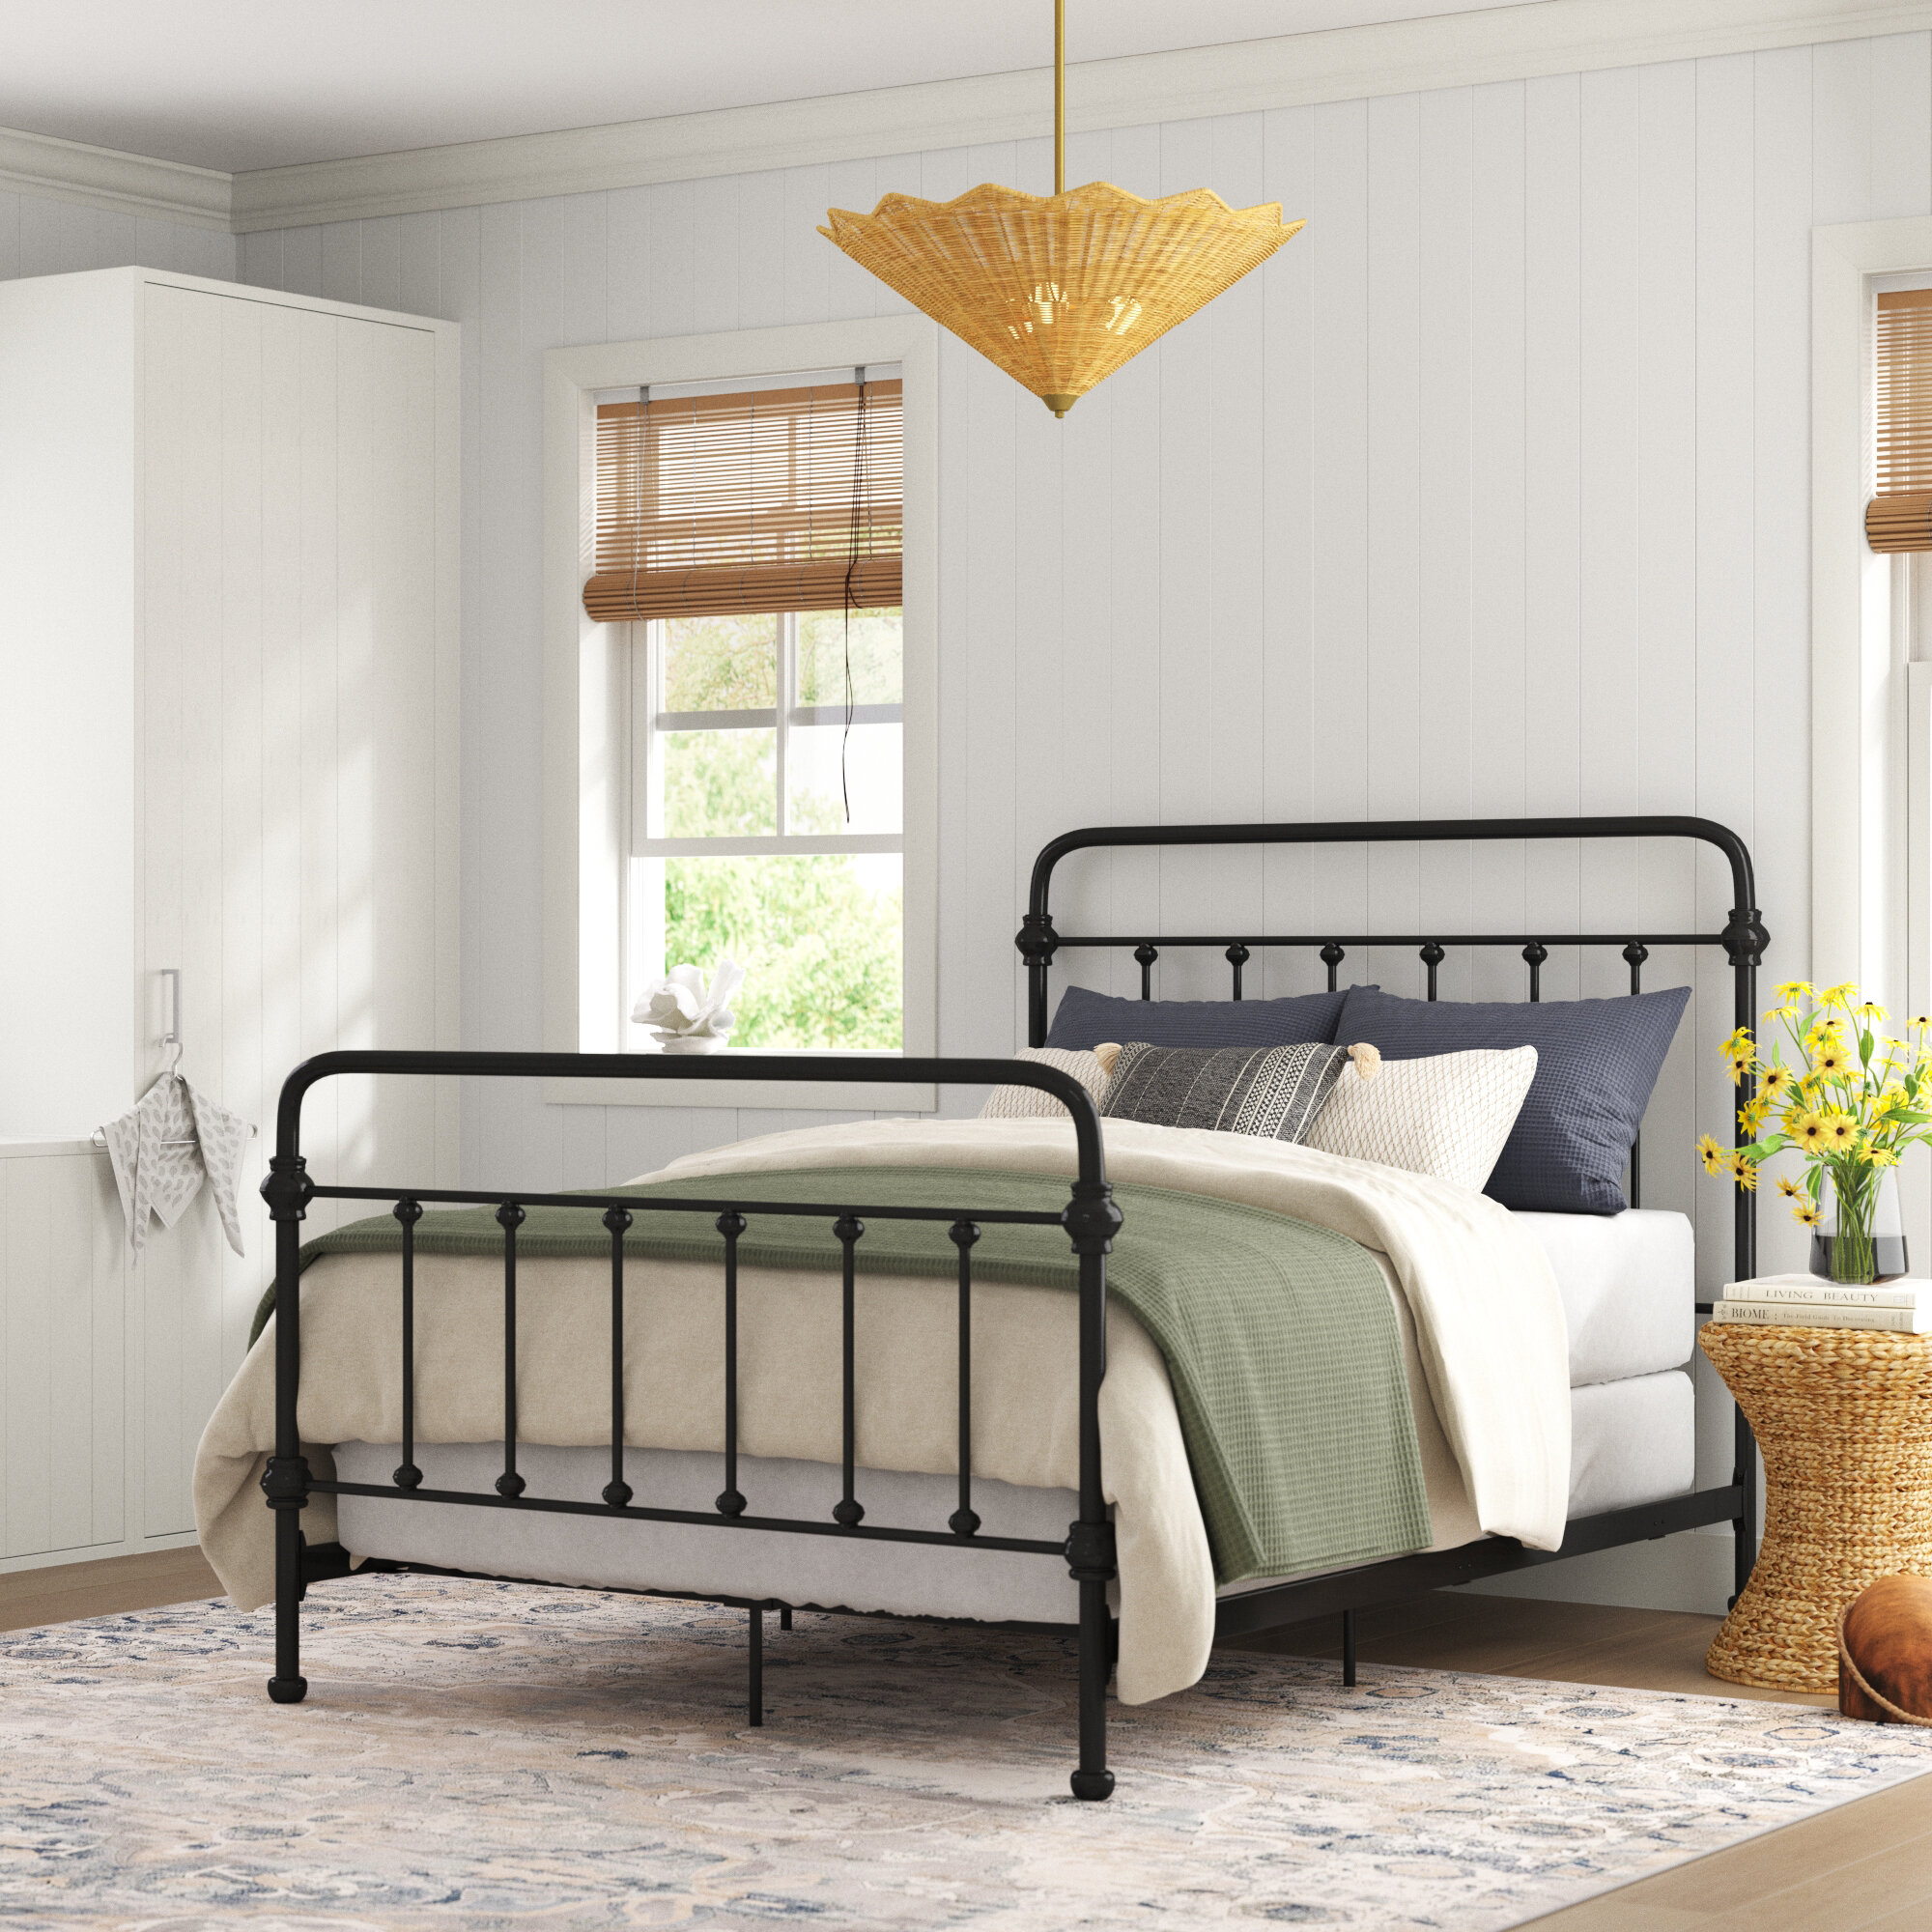 Sand & Stable Metal Bed & Reviews